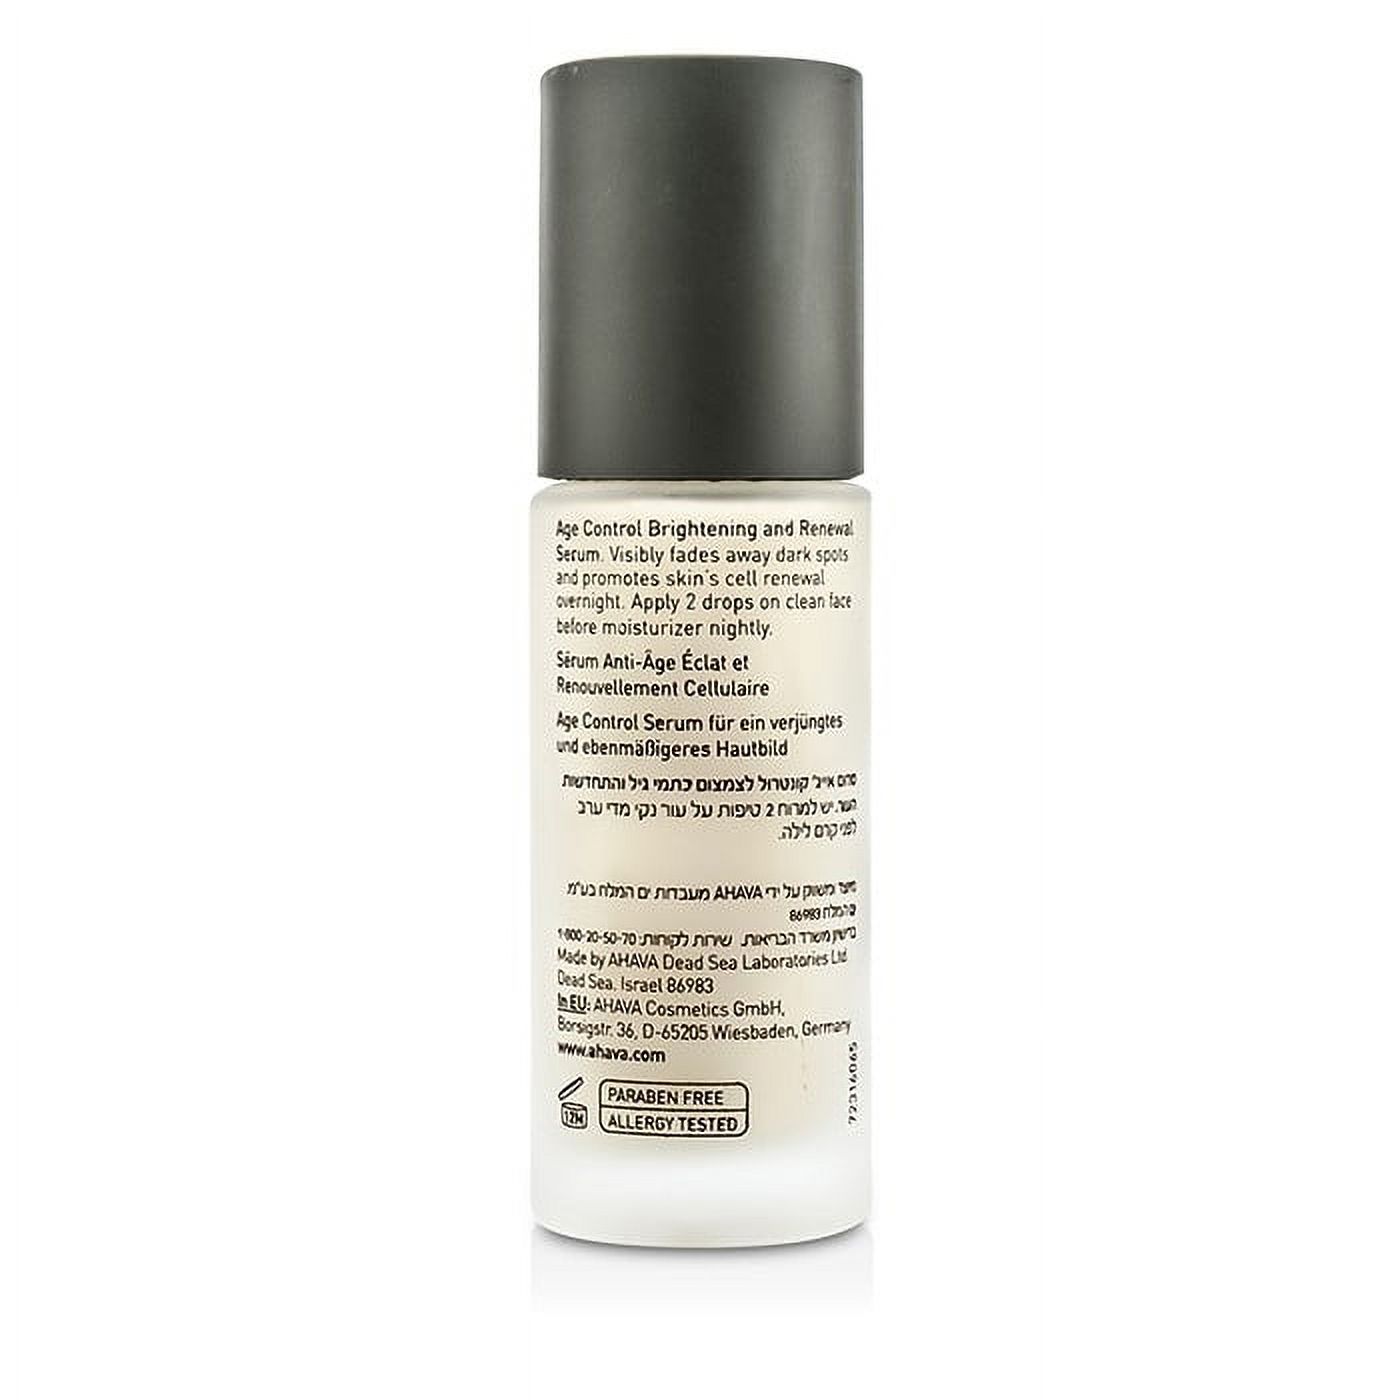 Ahava - Time To Smooth Age Control Brightening and Renewal Serum(30ml/1oz) - image 4 of 4